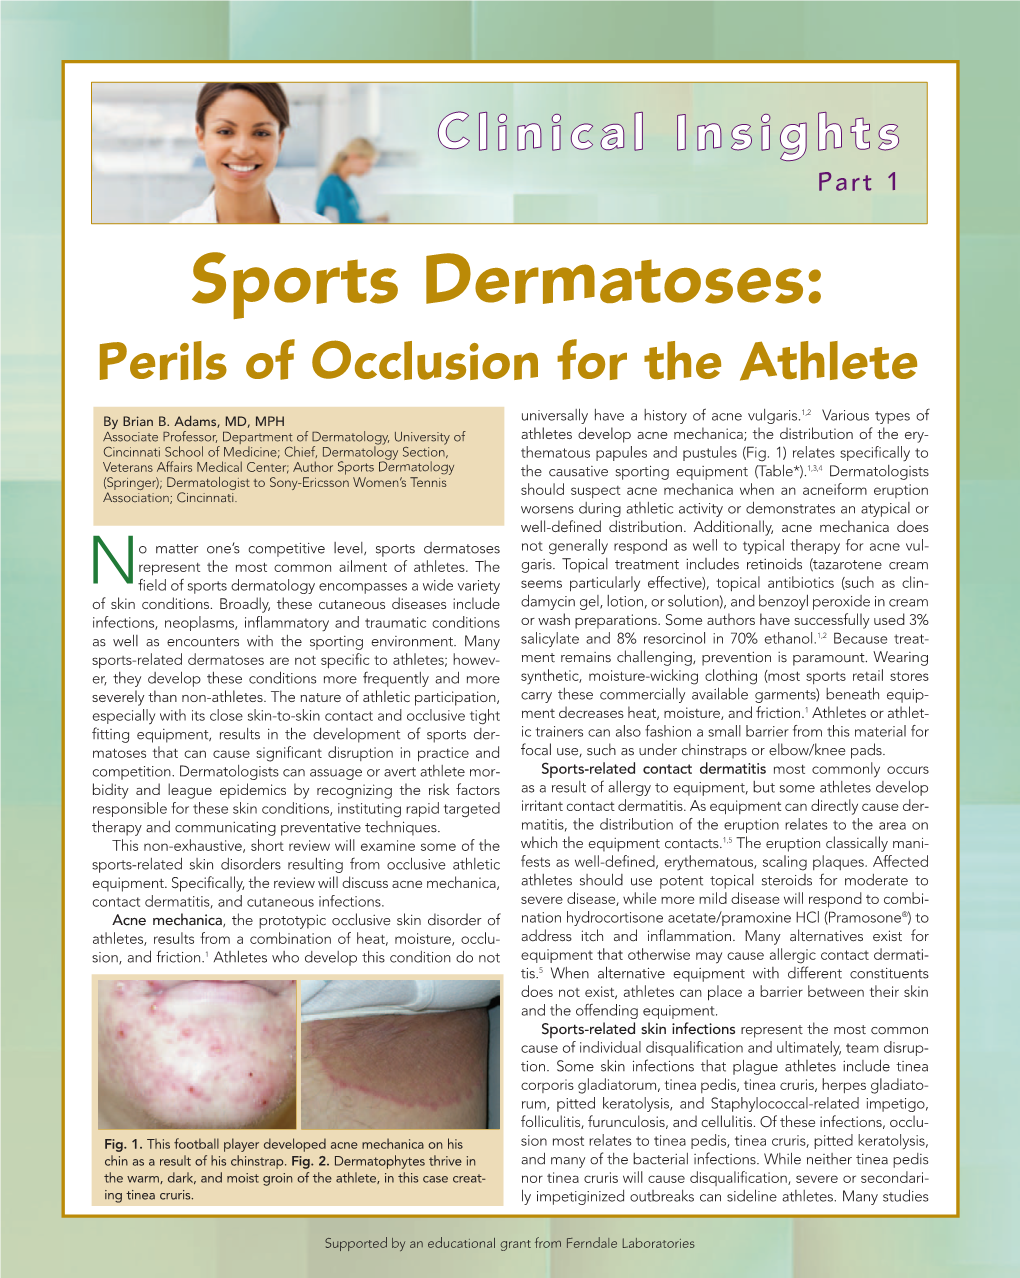 Sports Dermatoses: Perils of Occlusion for the Athlete